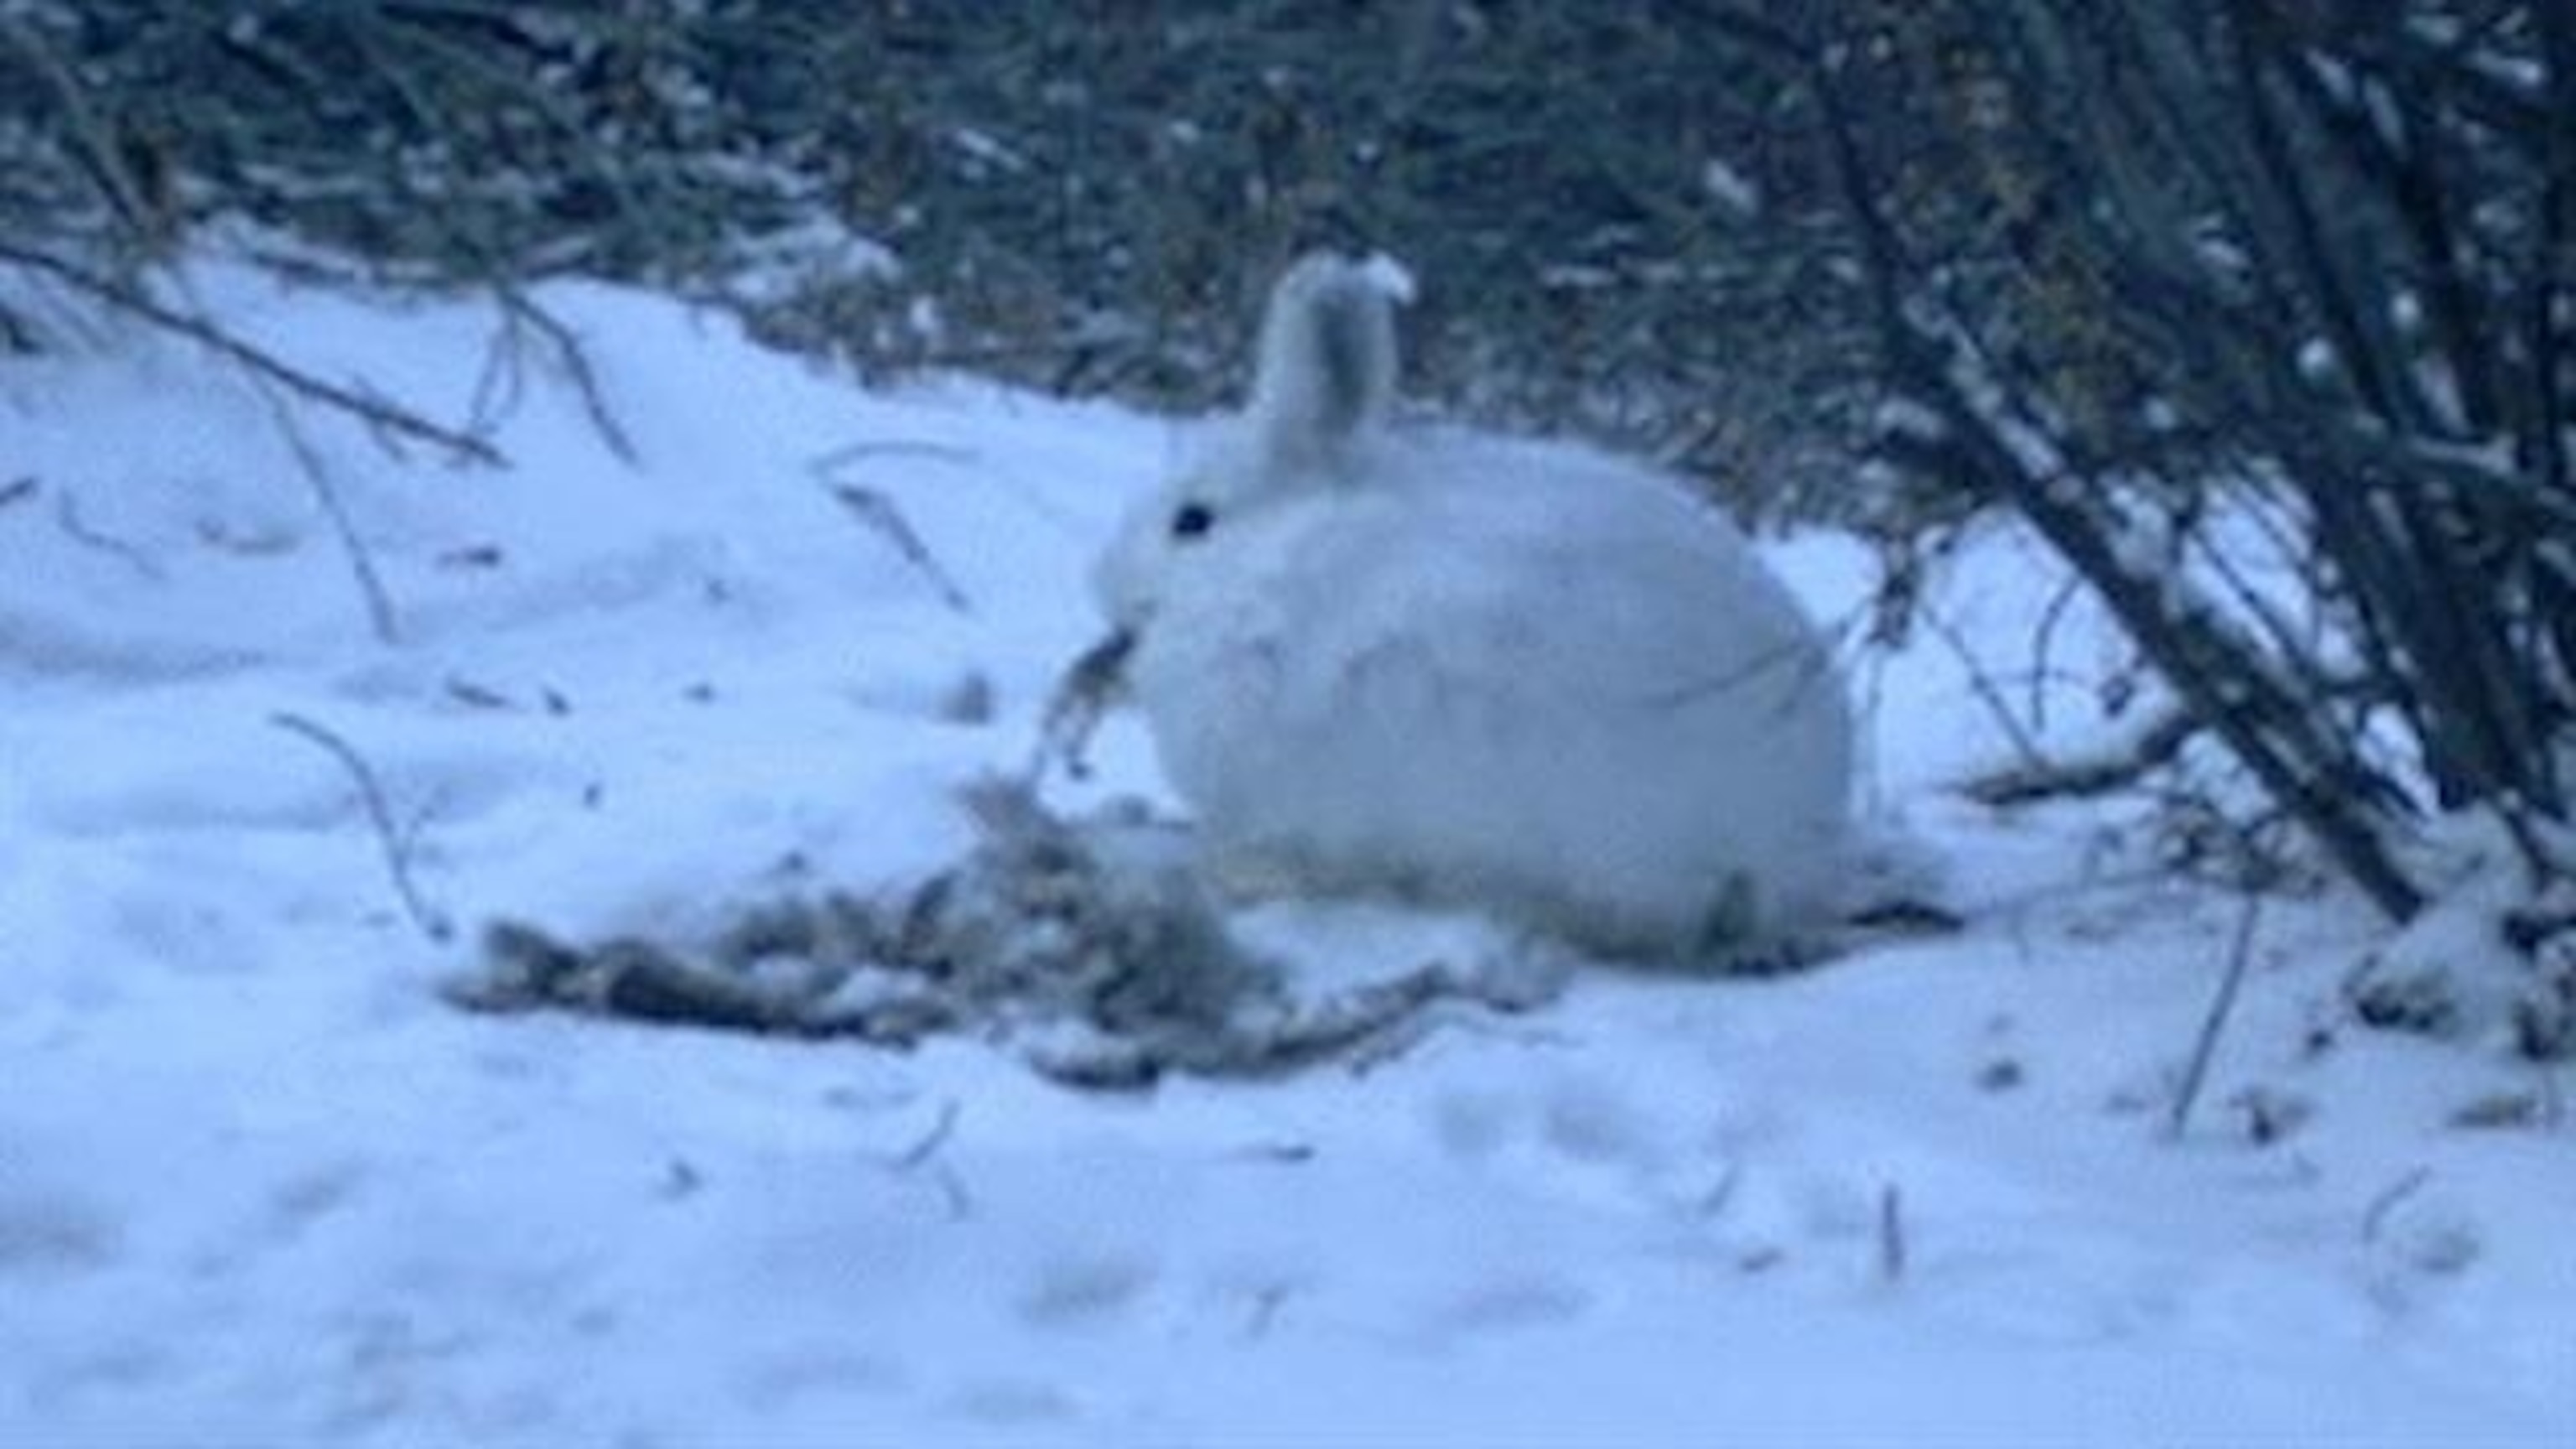 Canadian hares are cannibals and eat meat, surprising photo reveal